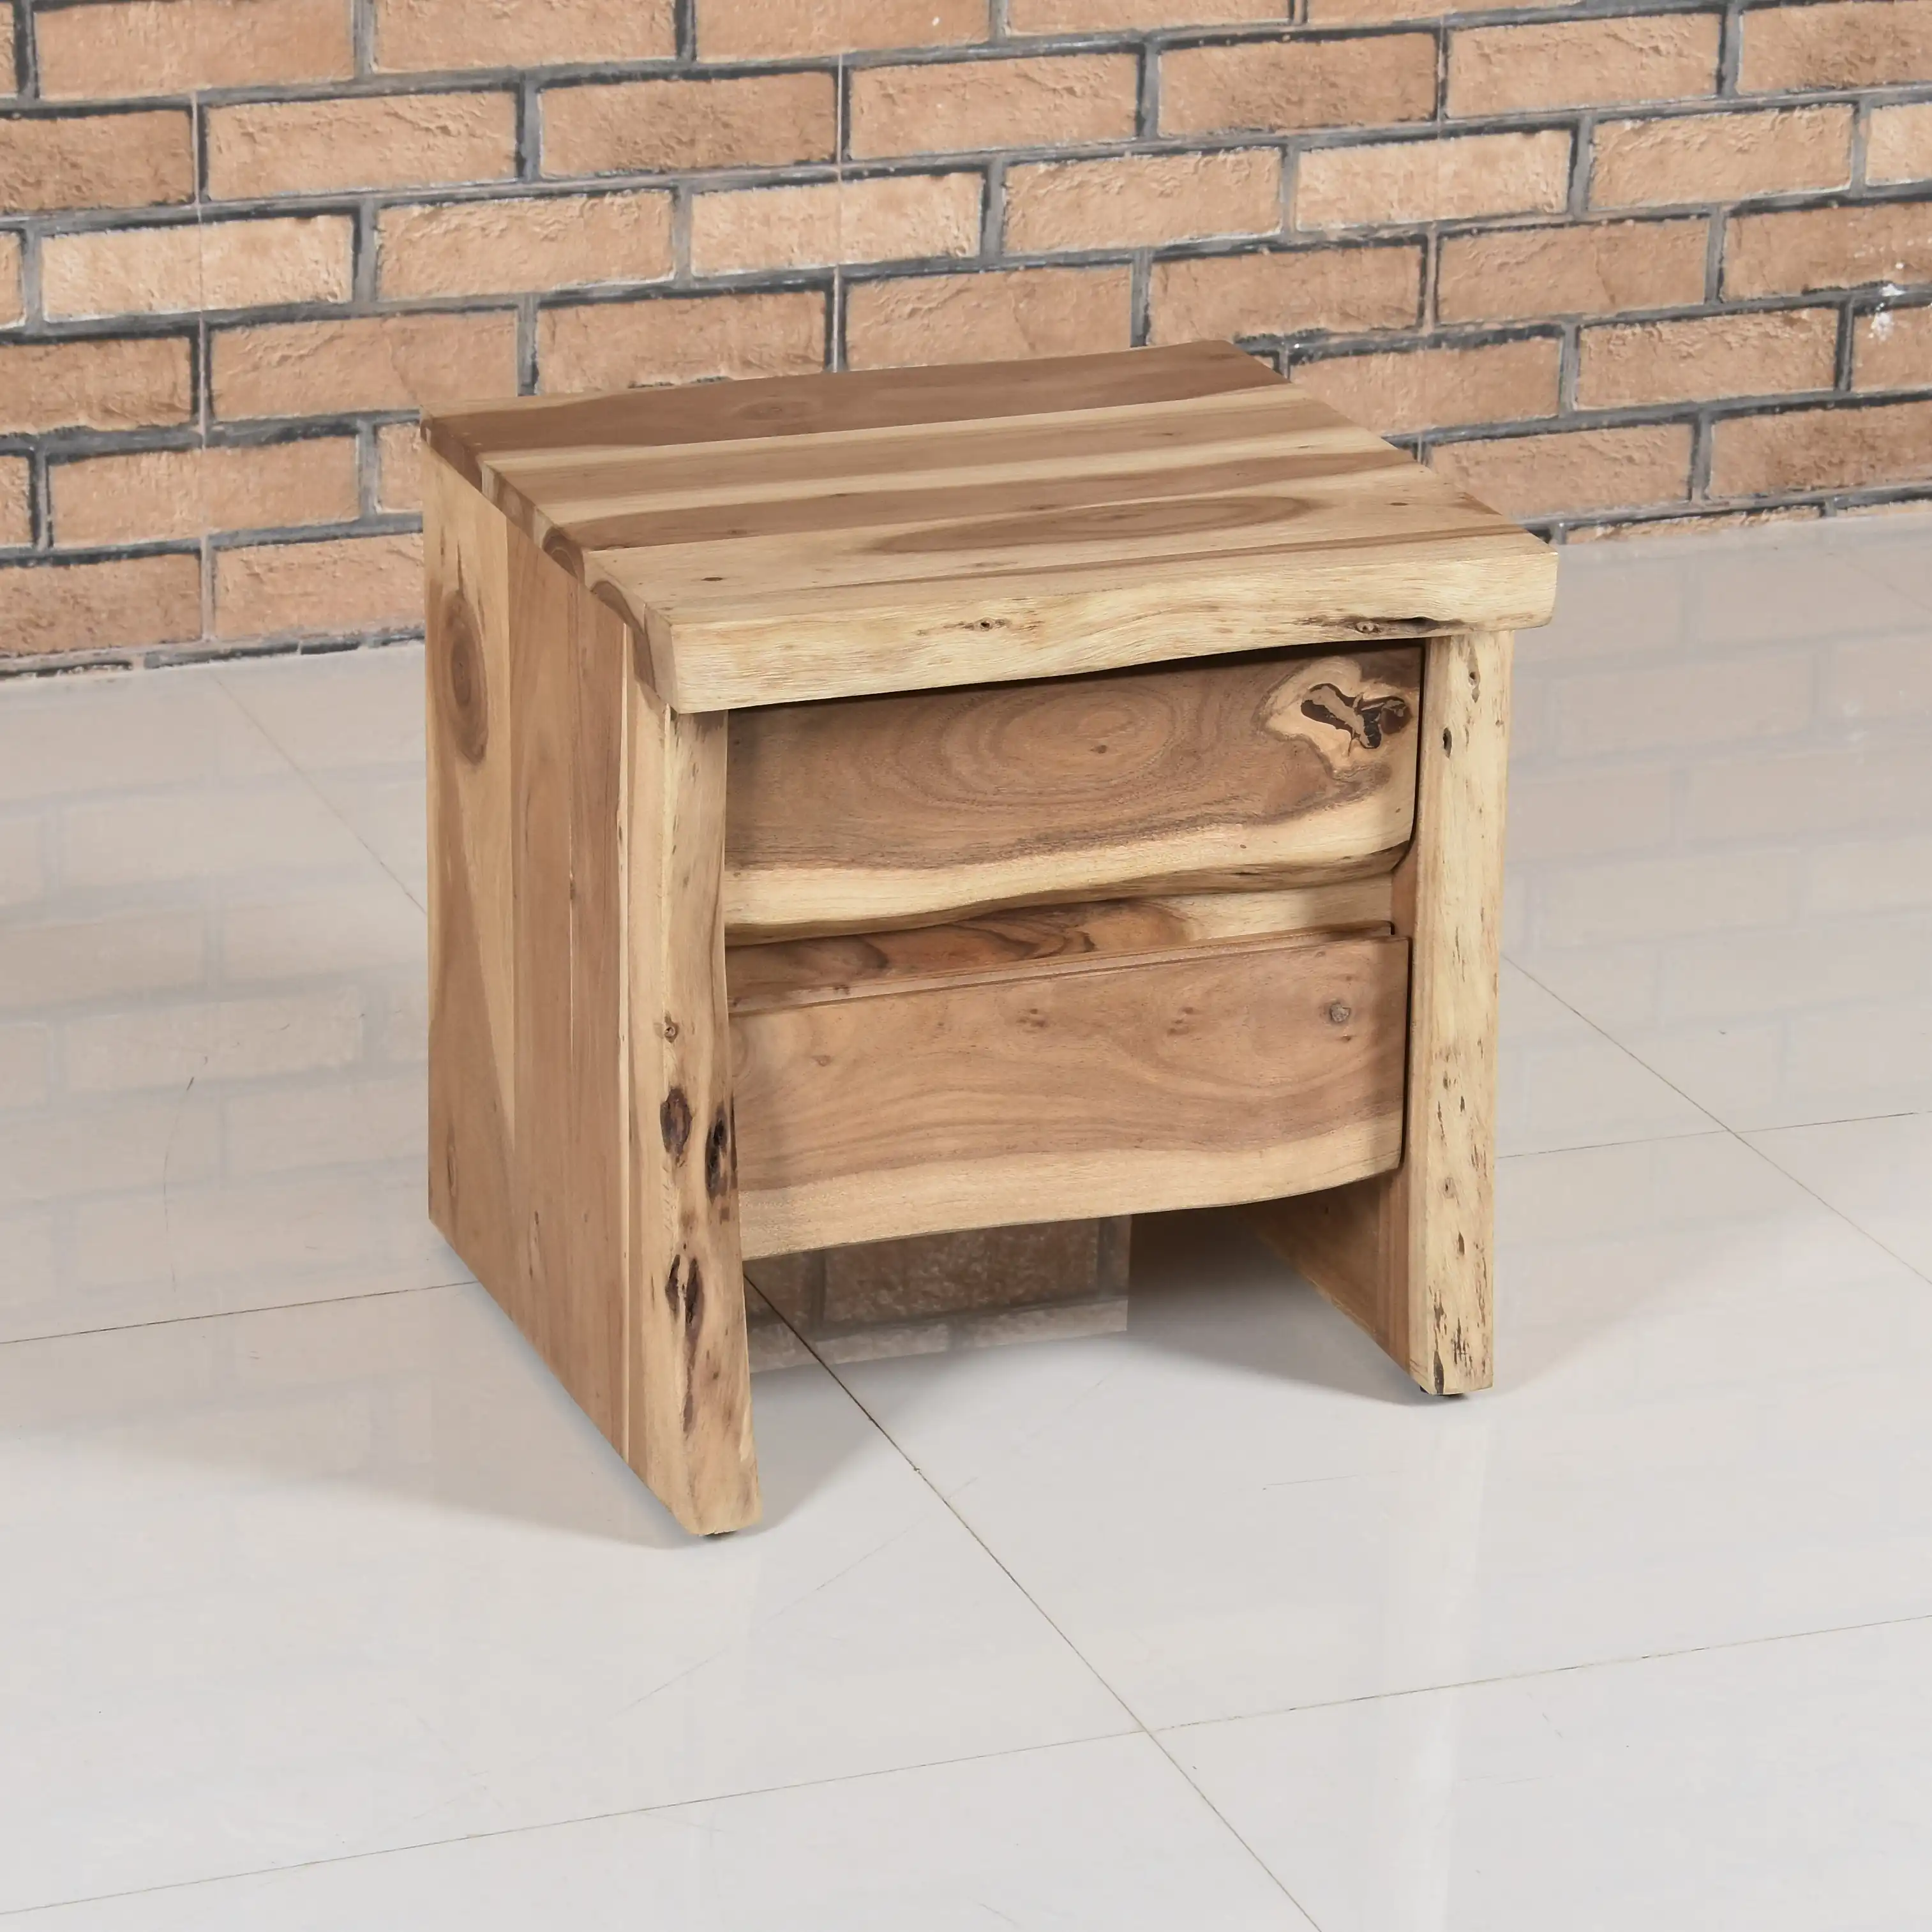 Wooden Live Edge Side Table with 2 Drawers - popular handicrafts